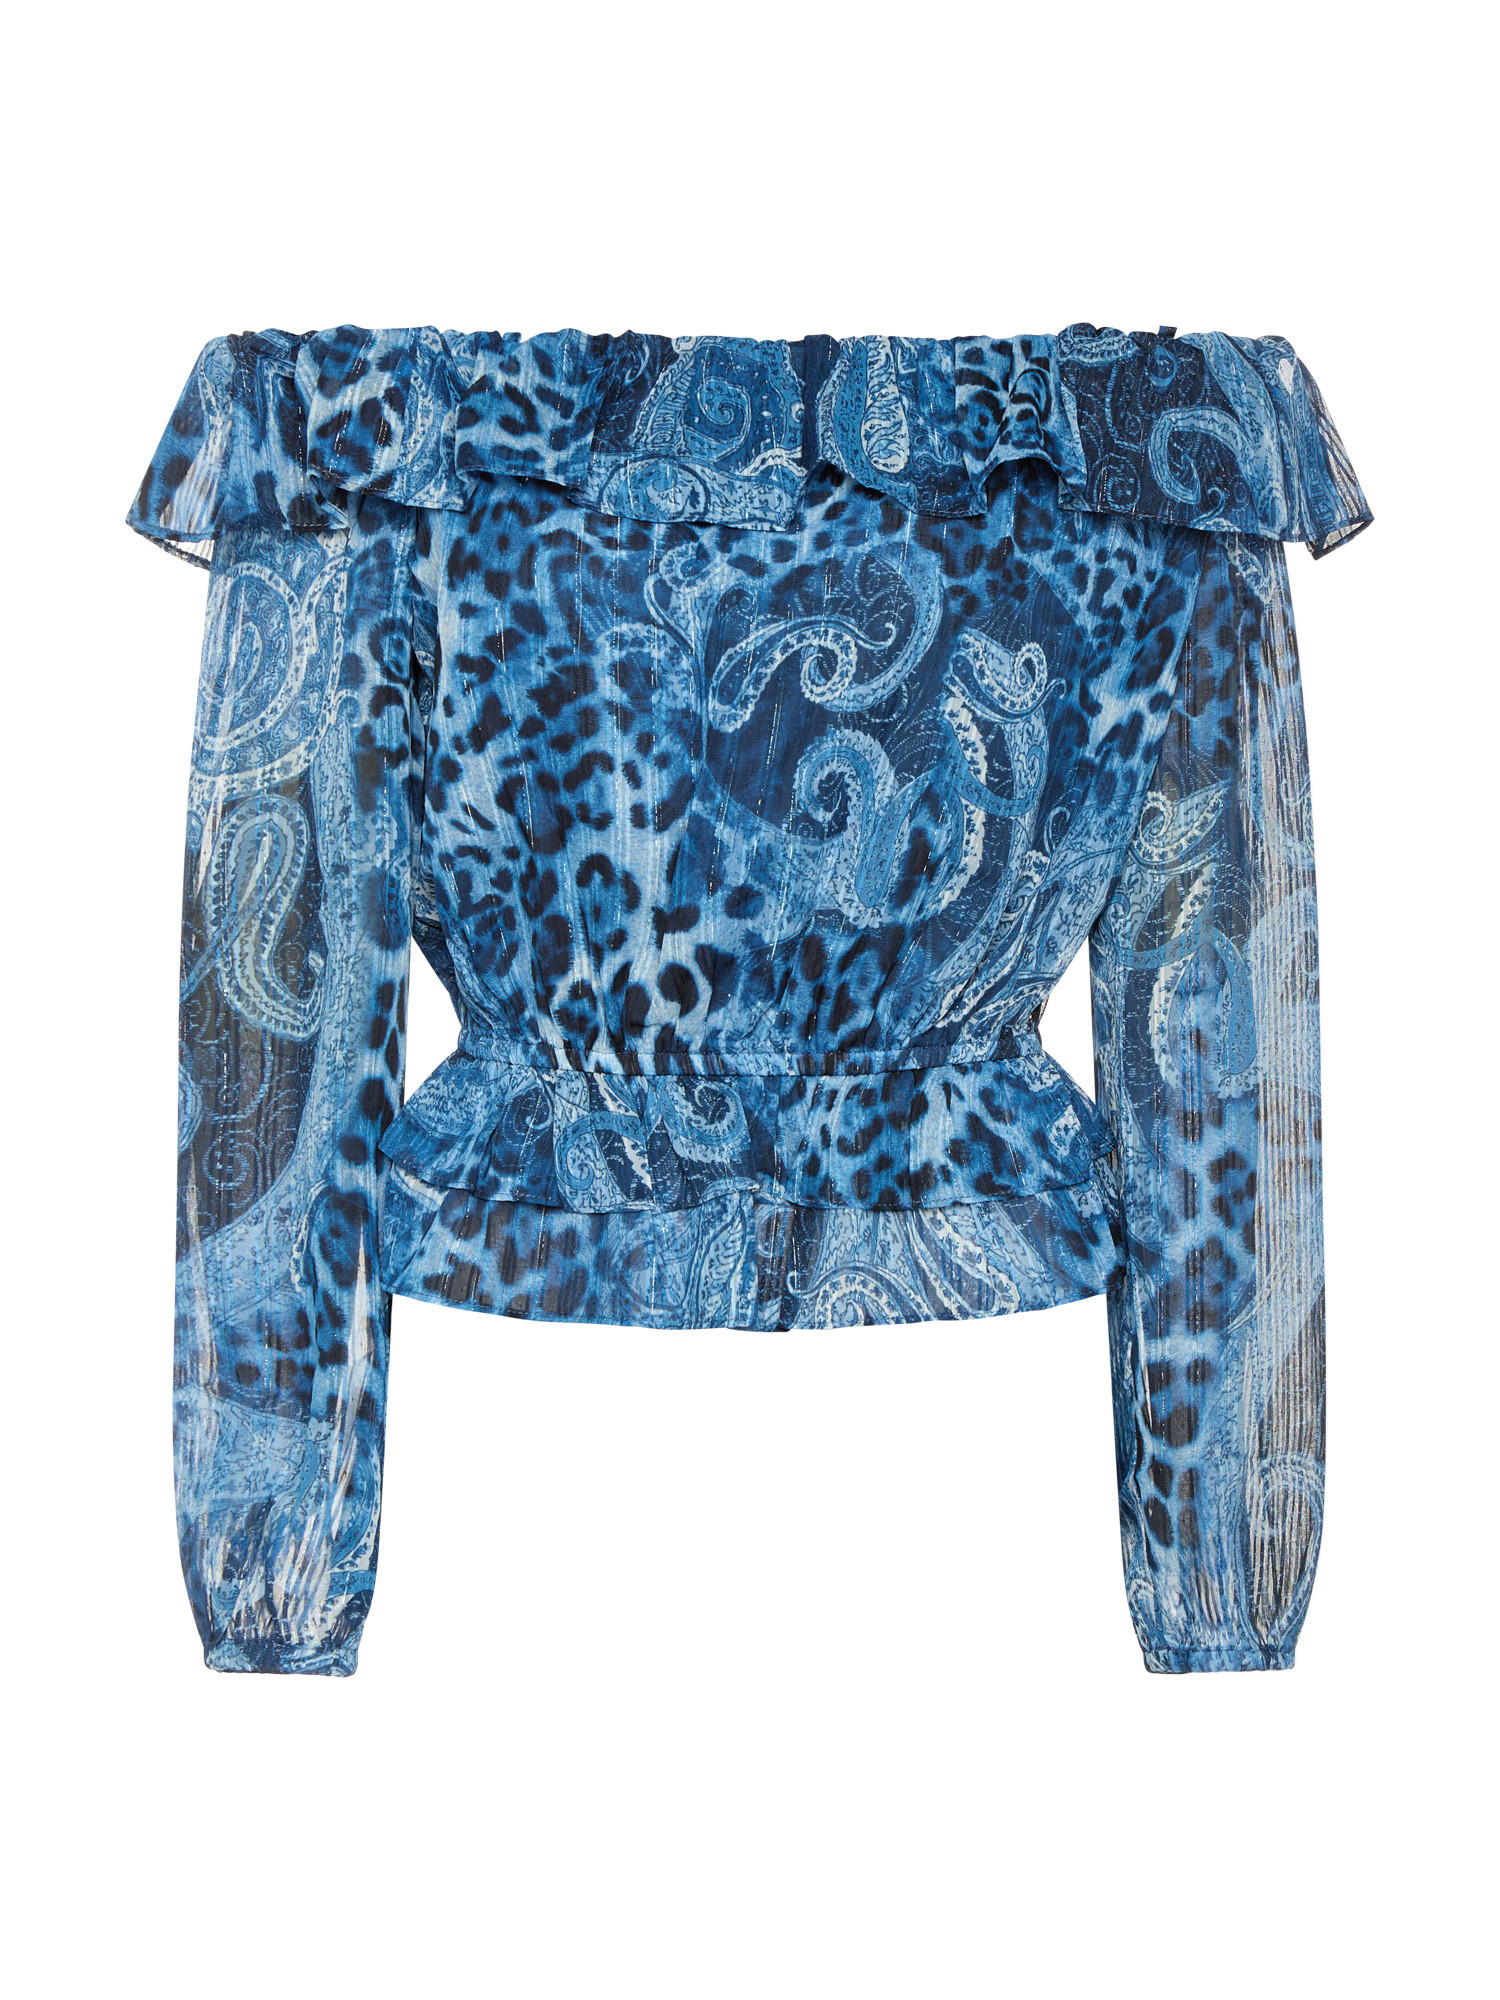 Guess - Paisley print blouse, Blue Dark, large image number 0